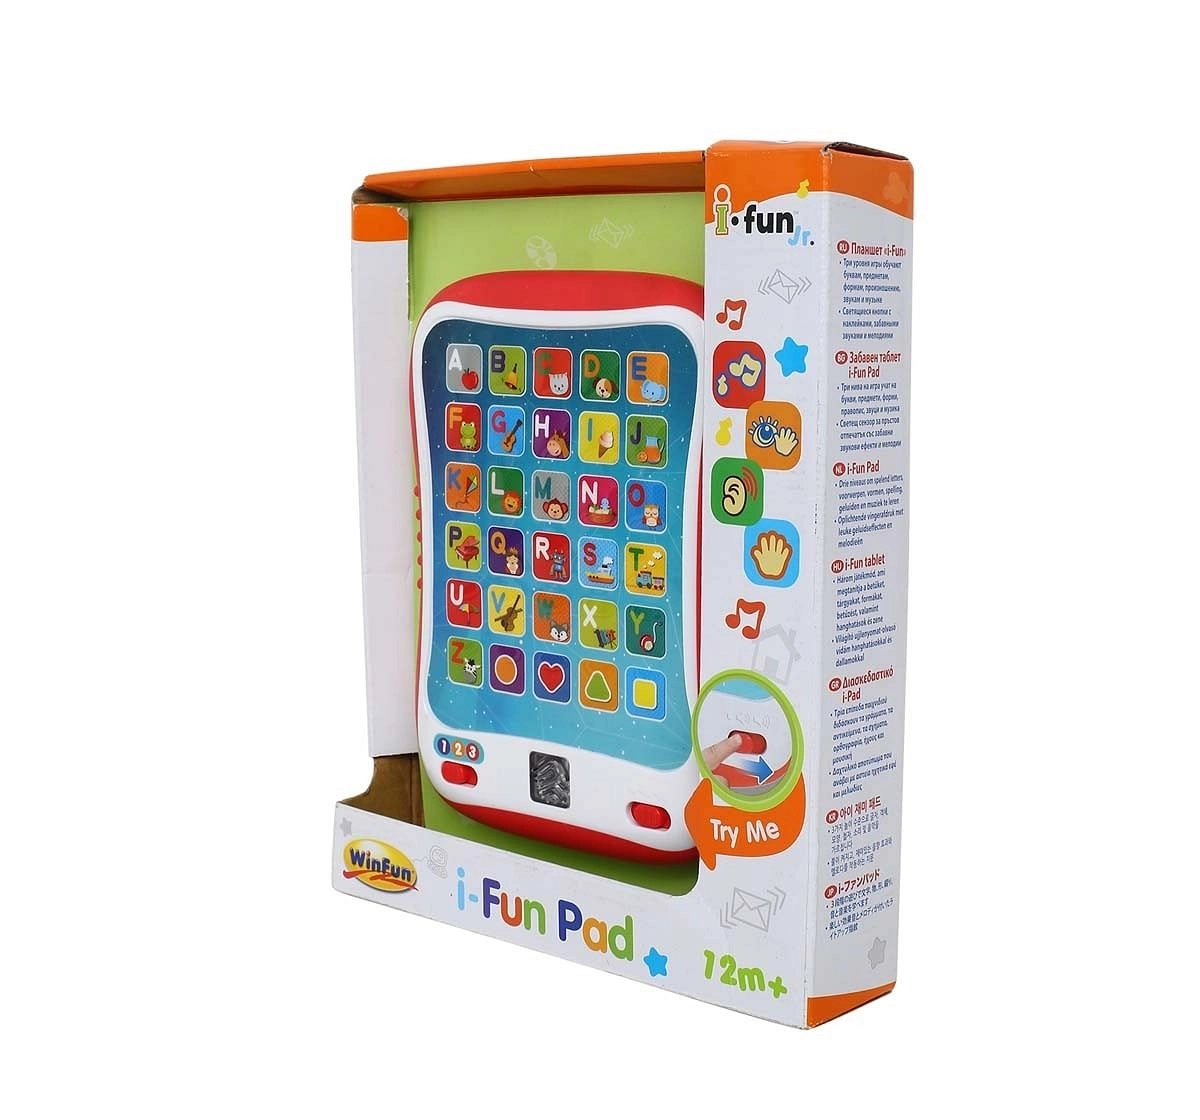 Winfun I Fun Pad, Multi Color Learning Toys for Kids age 12M+ 